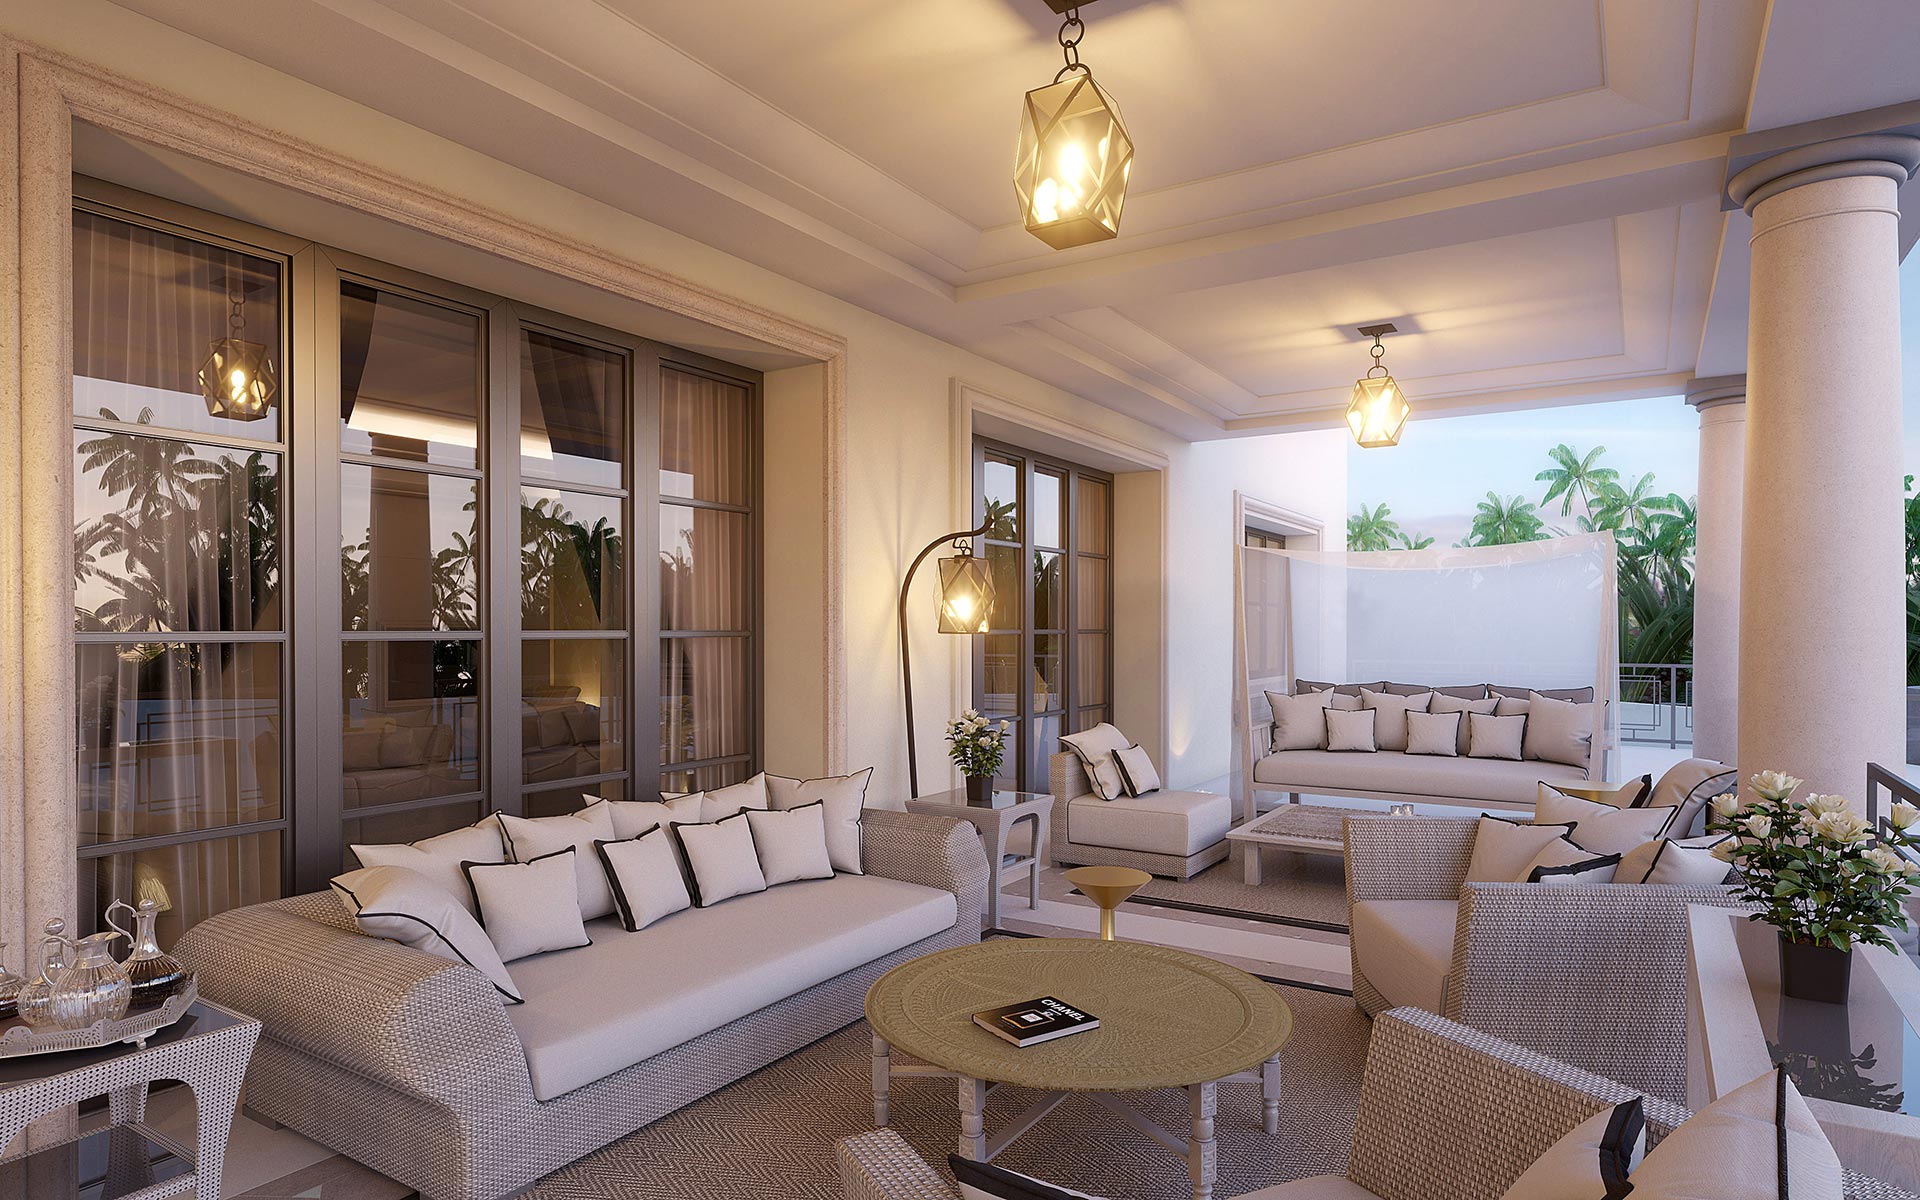 Visualization of a covered terrace for a luxury villa project in Morocco